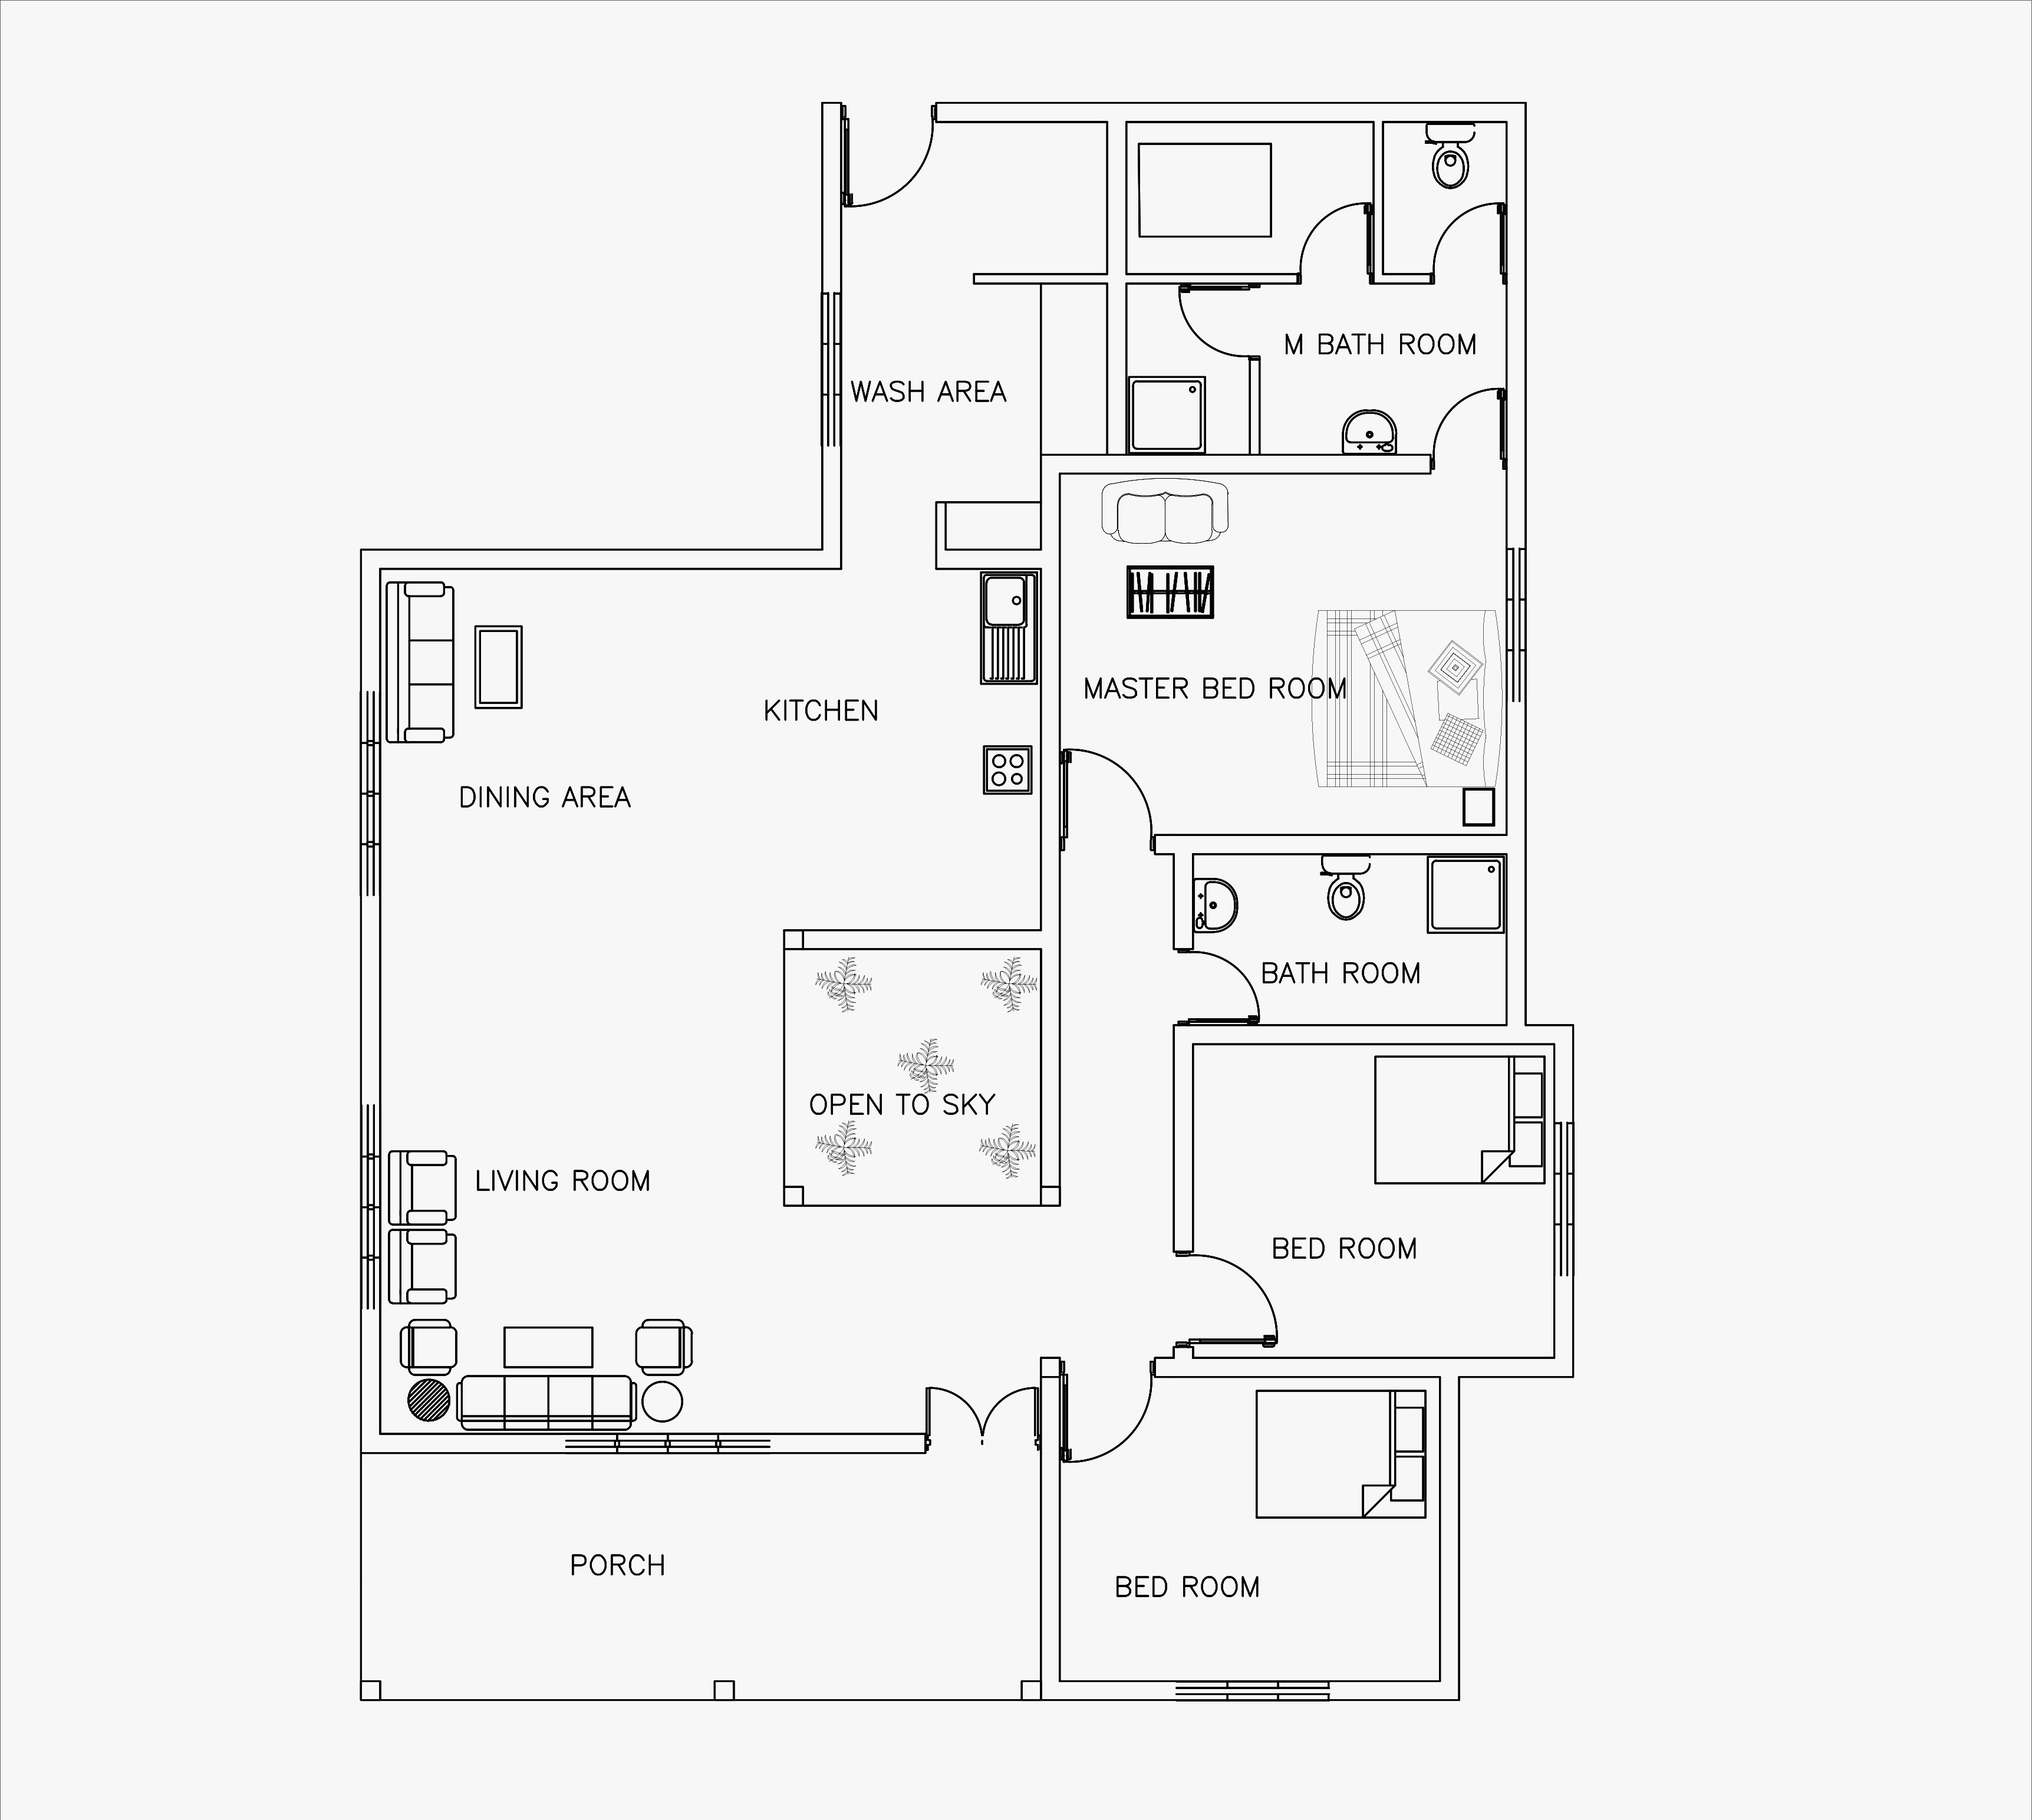 PVcirtual Simple Autocad House Plans Drawings Free Download